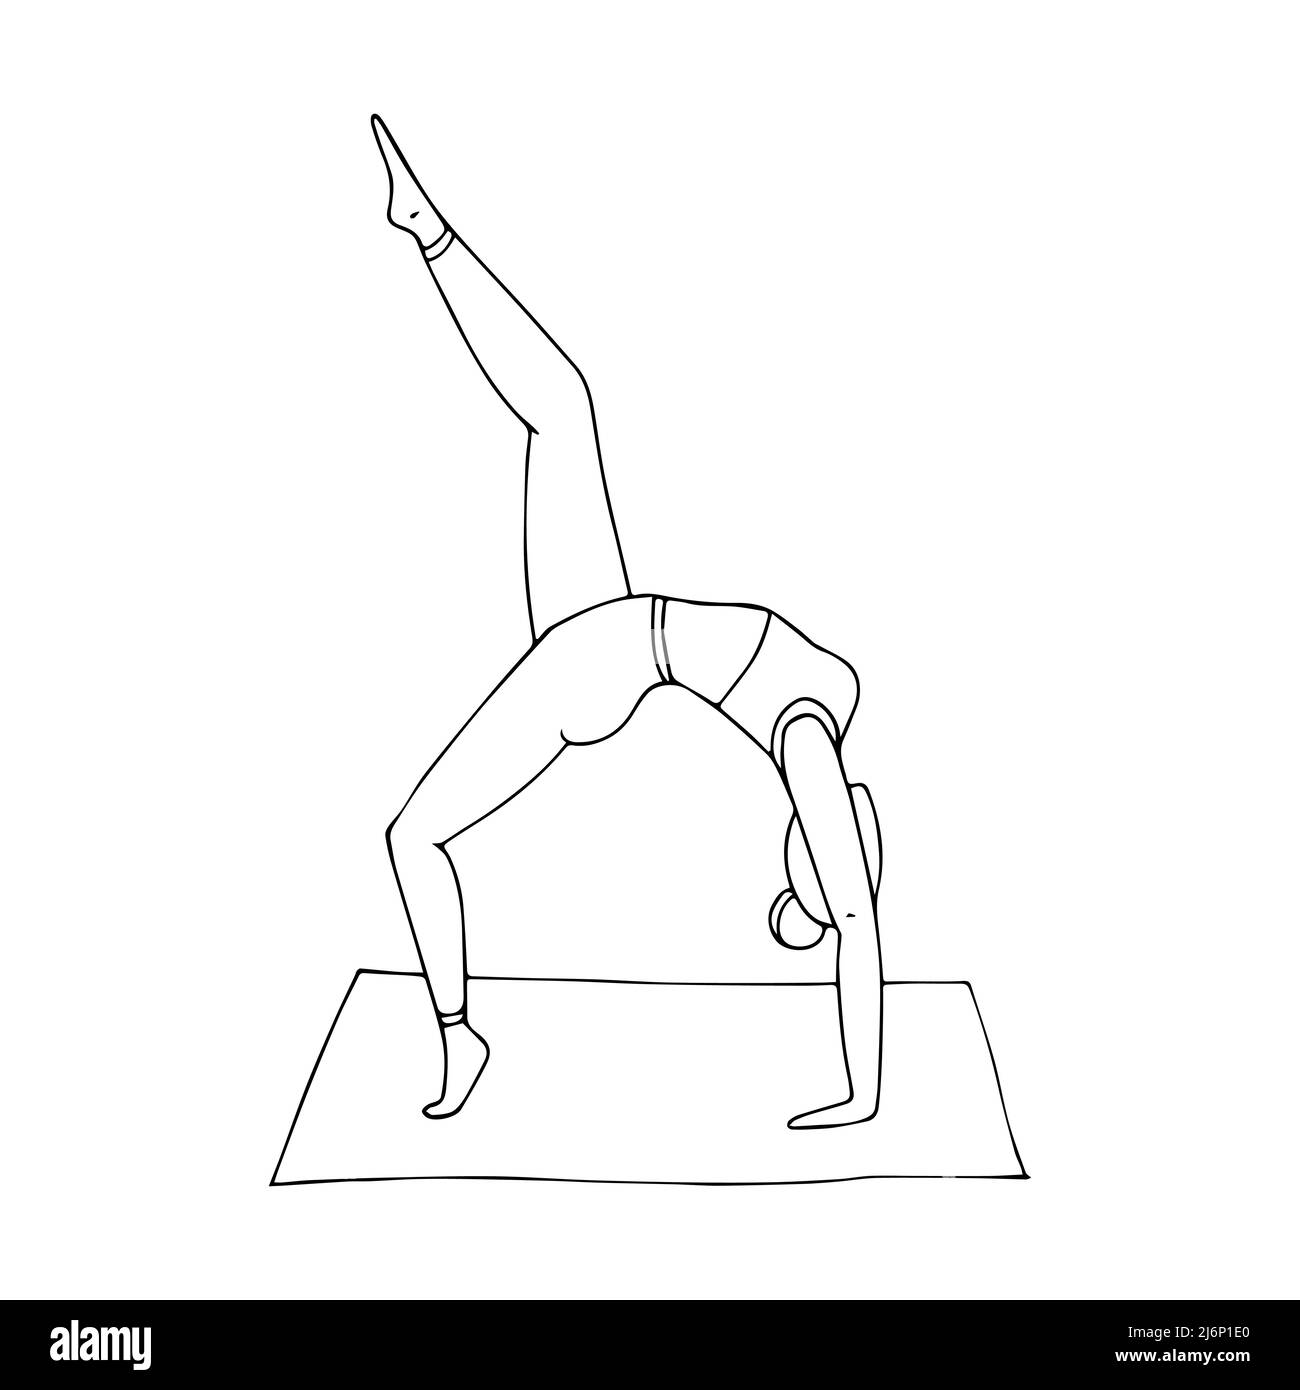 A young girl practices Hatha yoga. Indian culture. Gymnastics, healthy lifestyle. Doodle style. Black and white vector illustration. Hand-drawn, isola Stock Vector